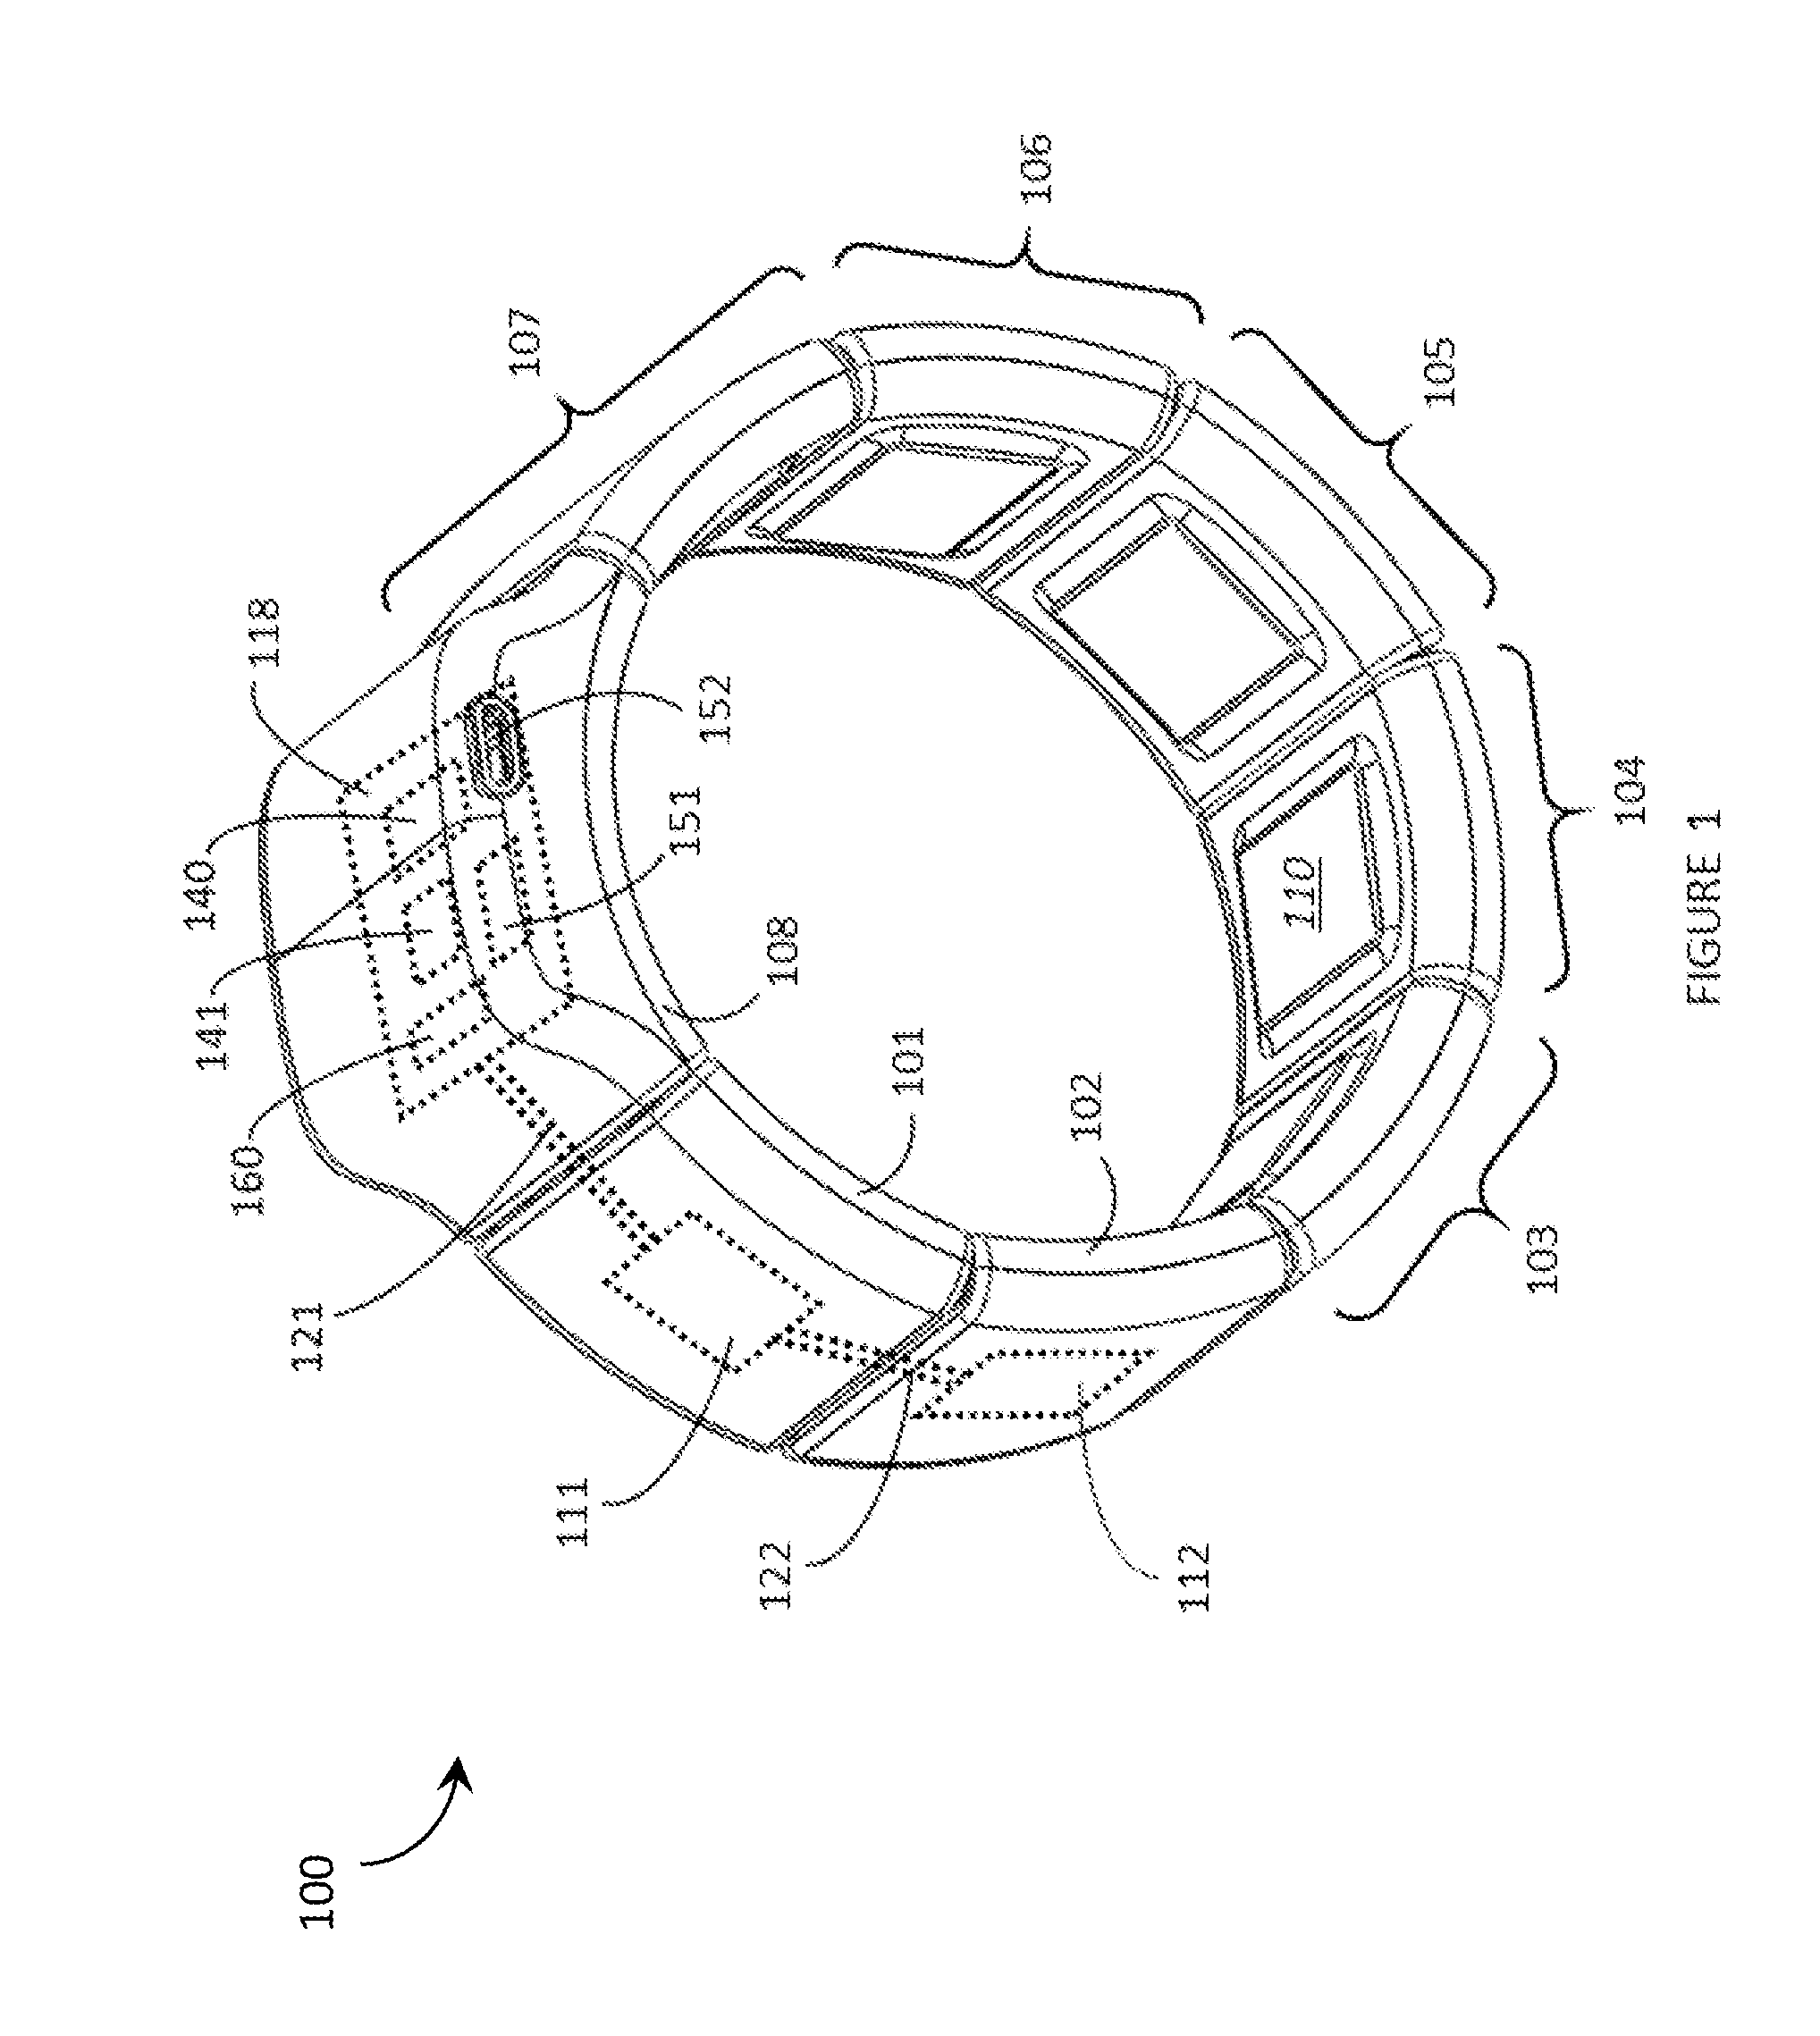 Systems, articles, and methods for human-electronics interfaces